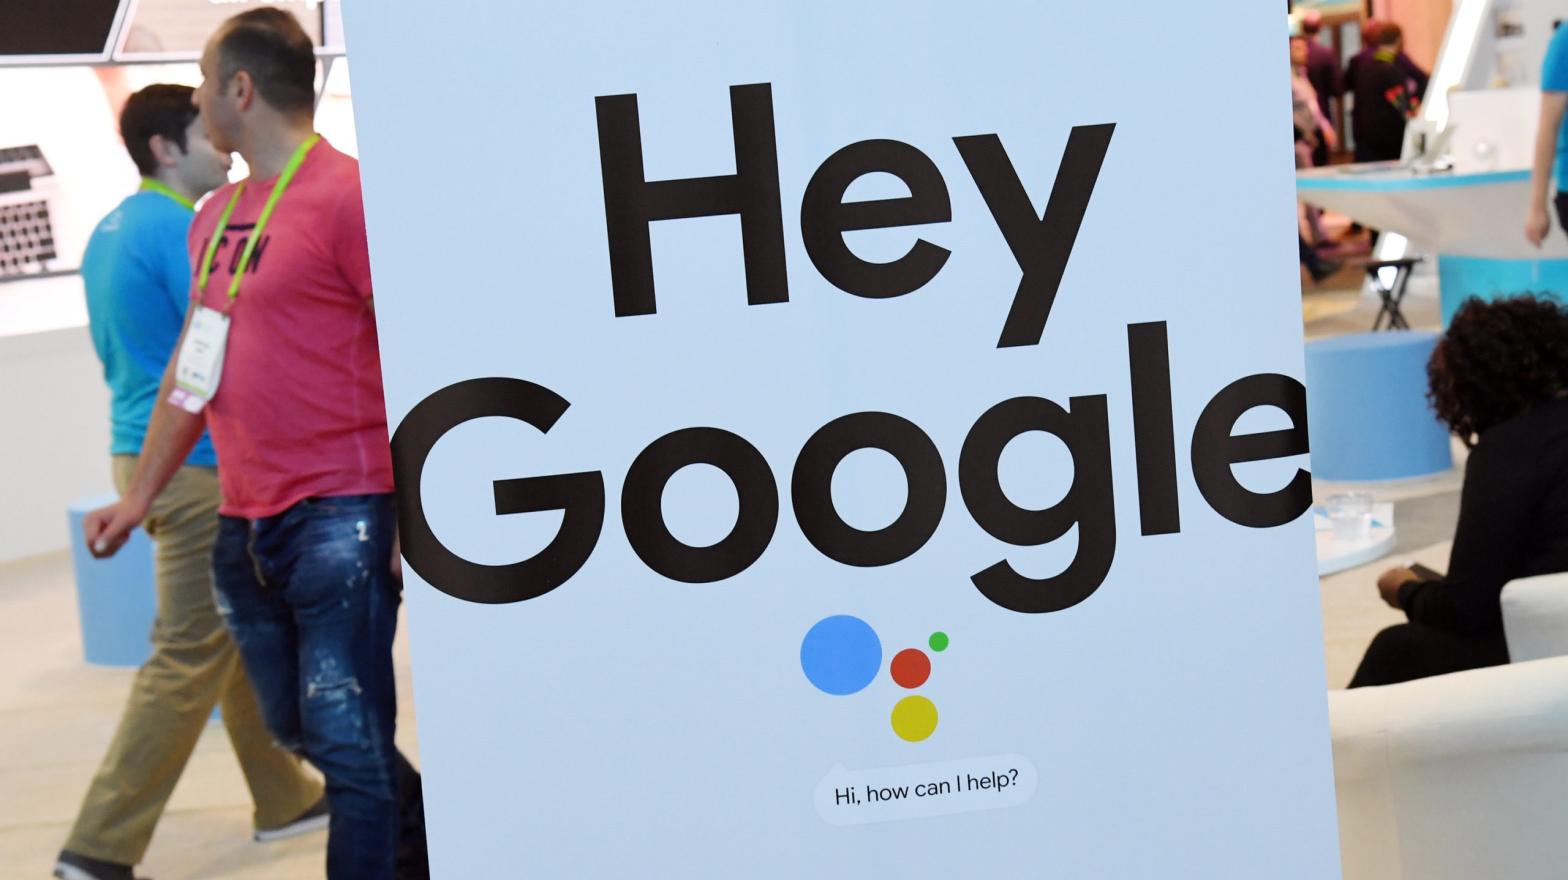 A sign for the Google Assistant is displayed during CES 2018 at the Sands Expo and Convention Centre on Jan. 9, 2018 in Las Vegas, Nevada. (Photo: Ethan Miller, Getty Images)